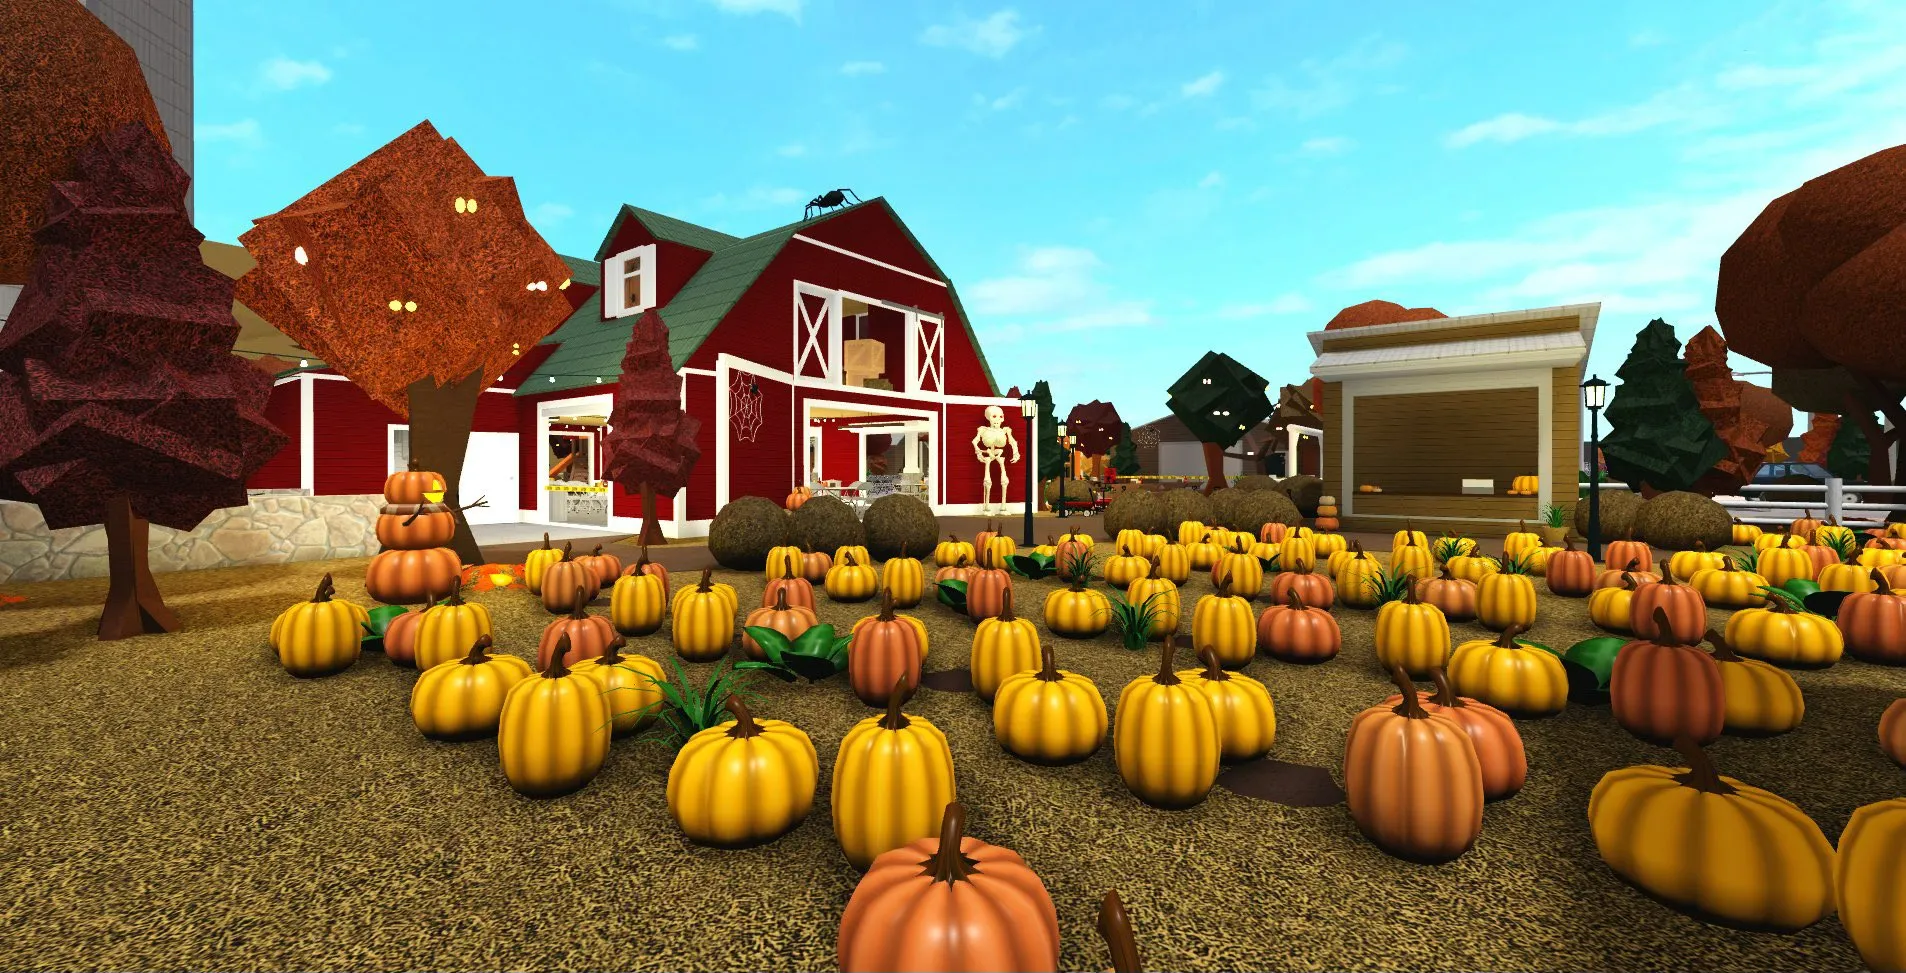 Decorated my house for Halloween! 👻 : r/Bloxburg